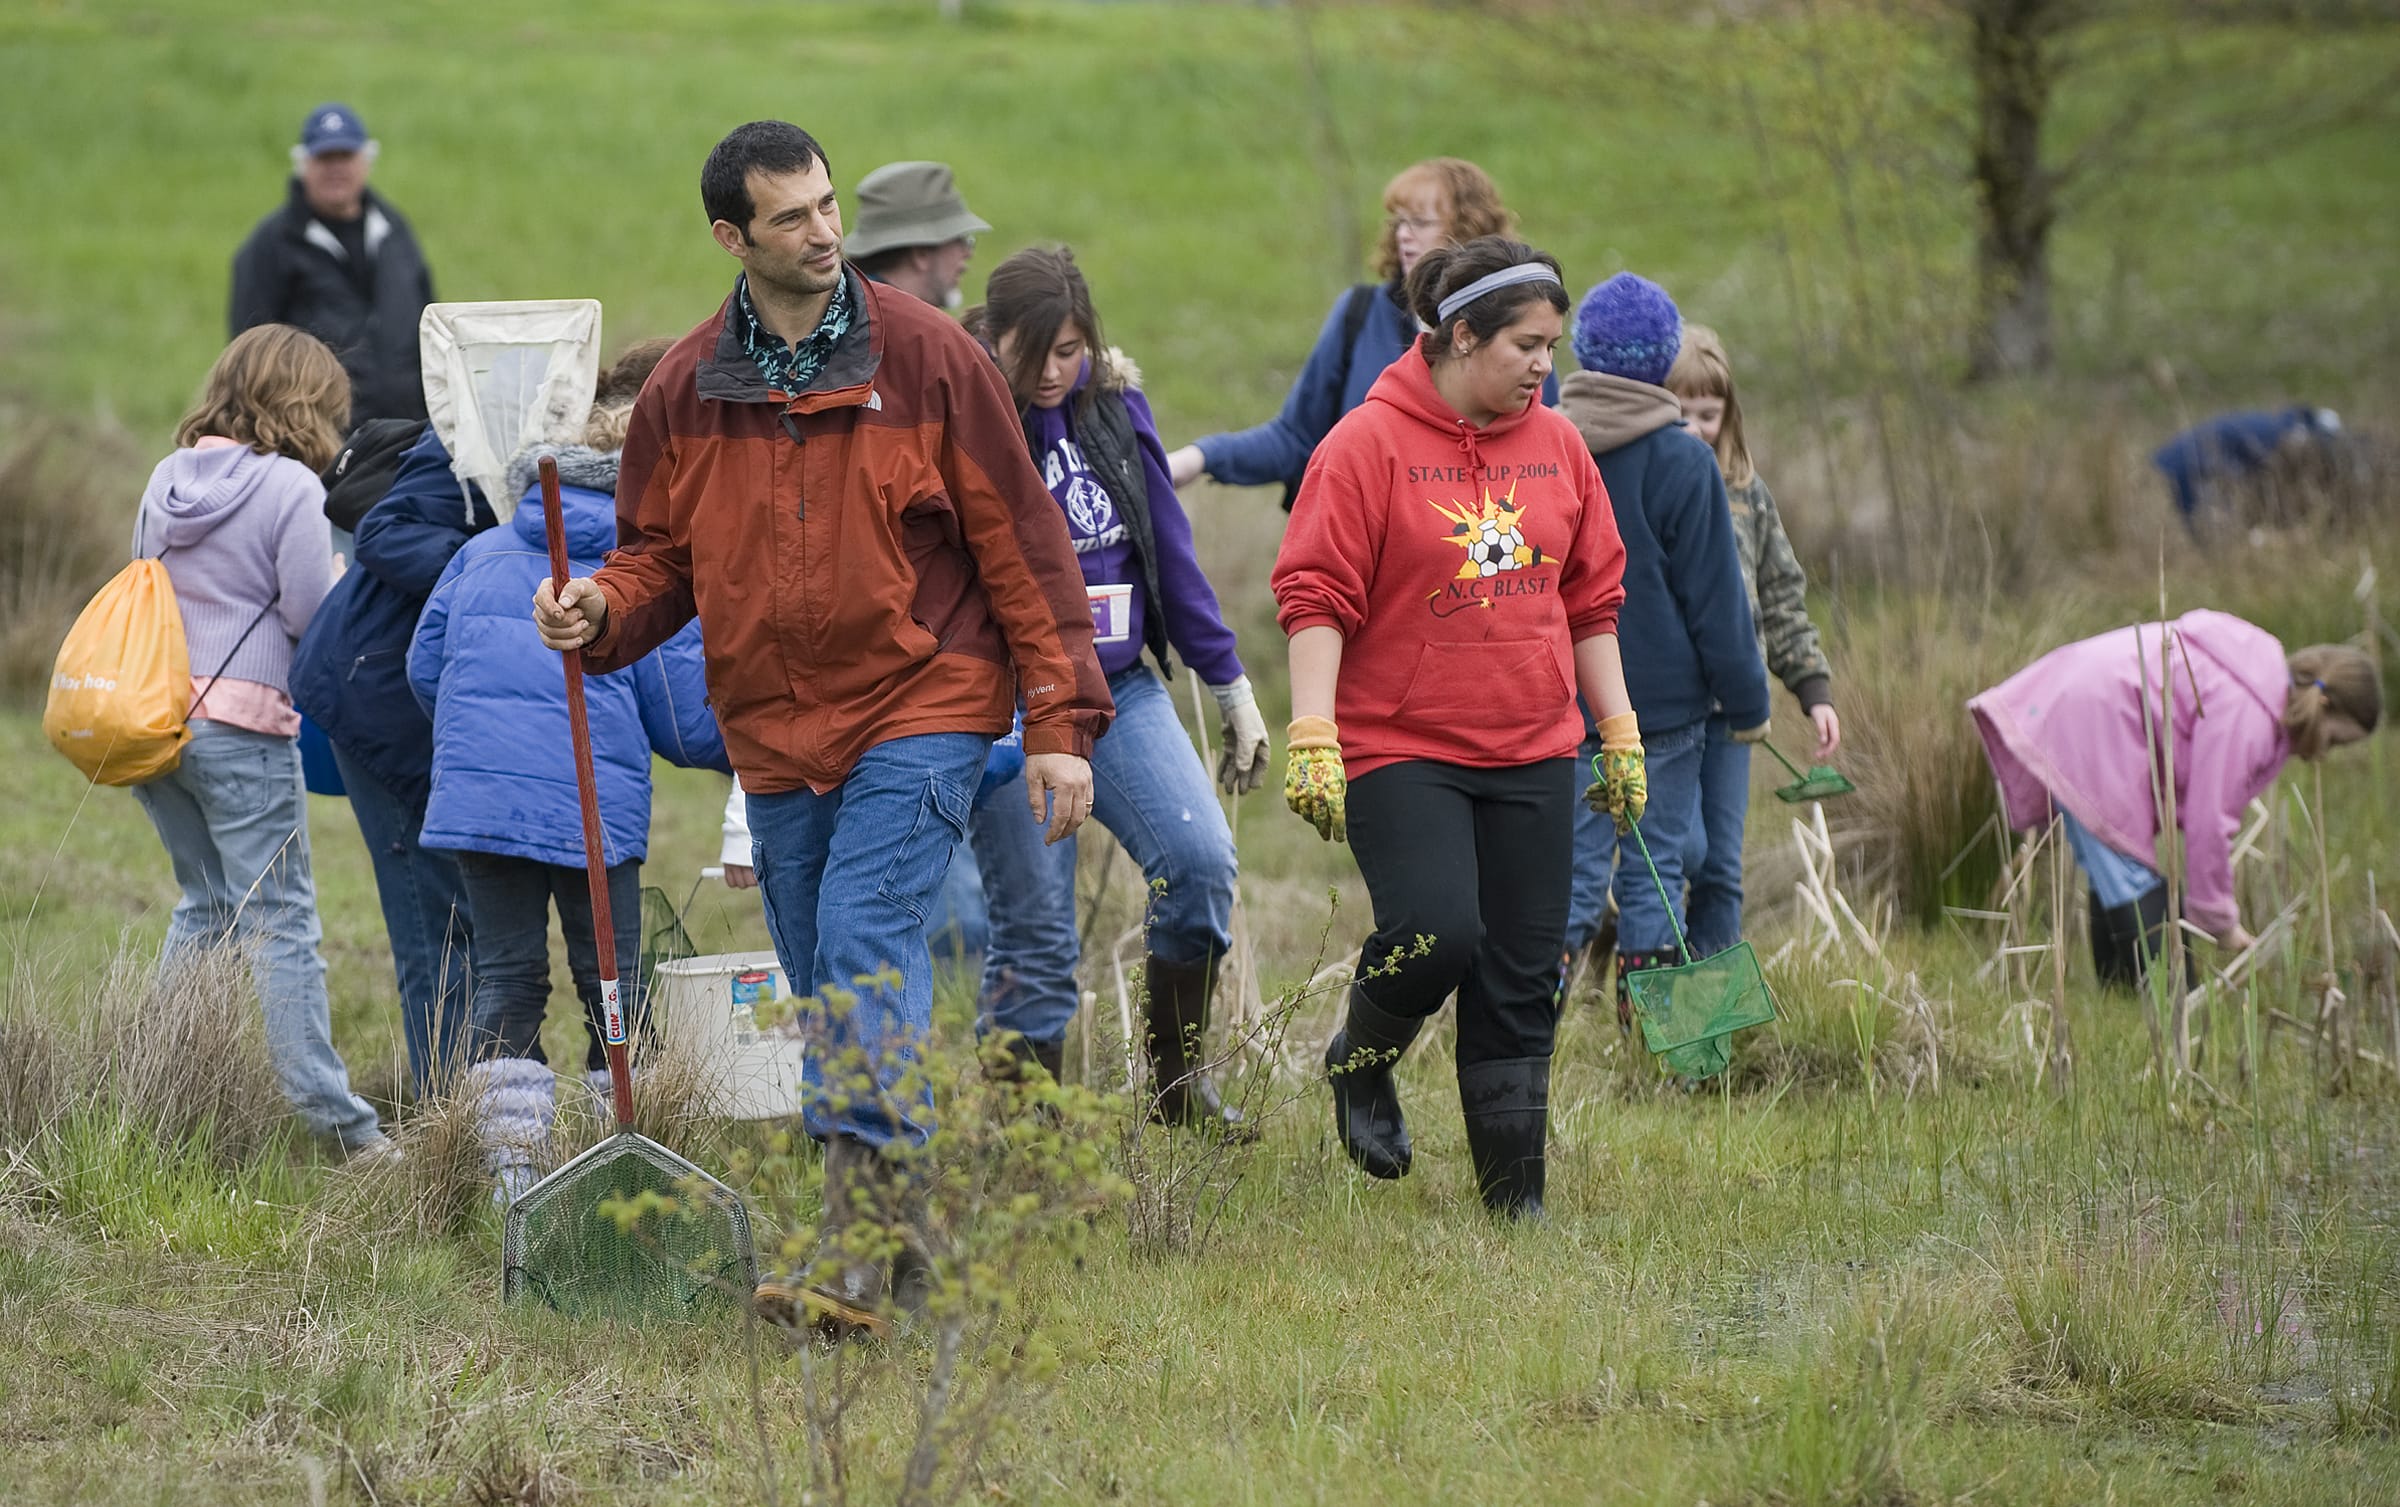 Peter Ritson, a chemistry instructor at Clark College, leads a group of amateur herpetologists through a wetland area of the Washington State University Vancouver campus during the 9th Annual Critter Count on April 11, 2009.